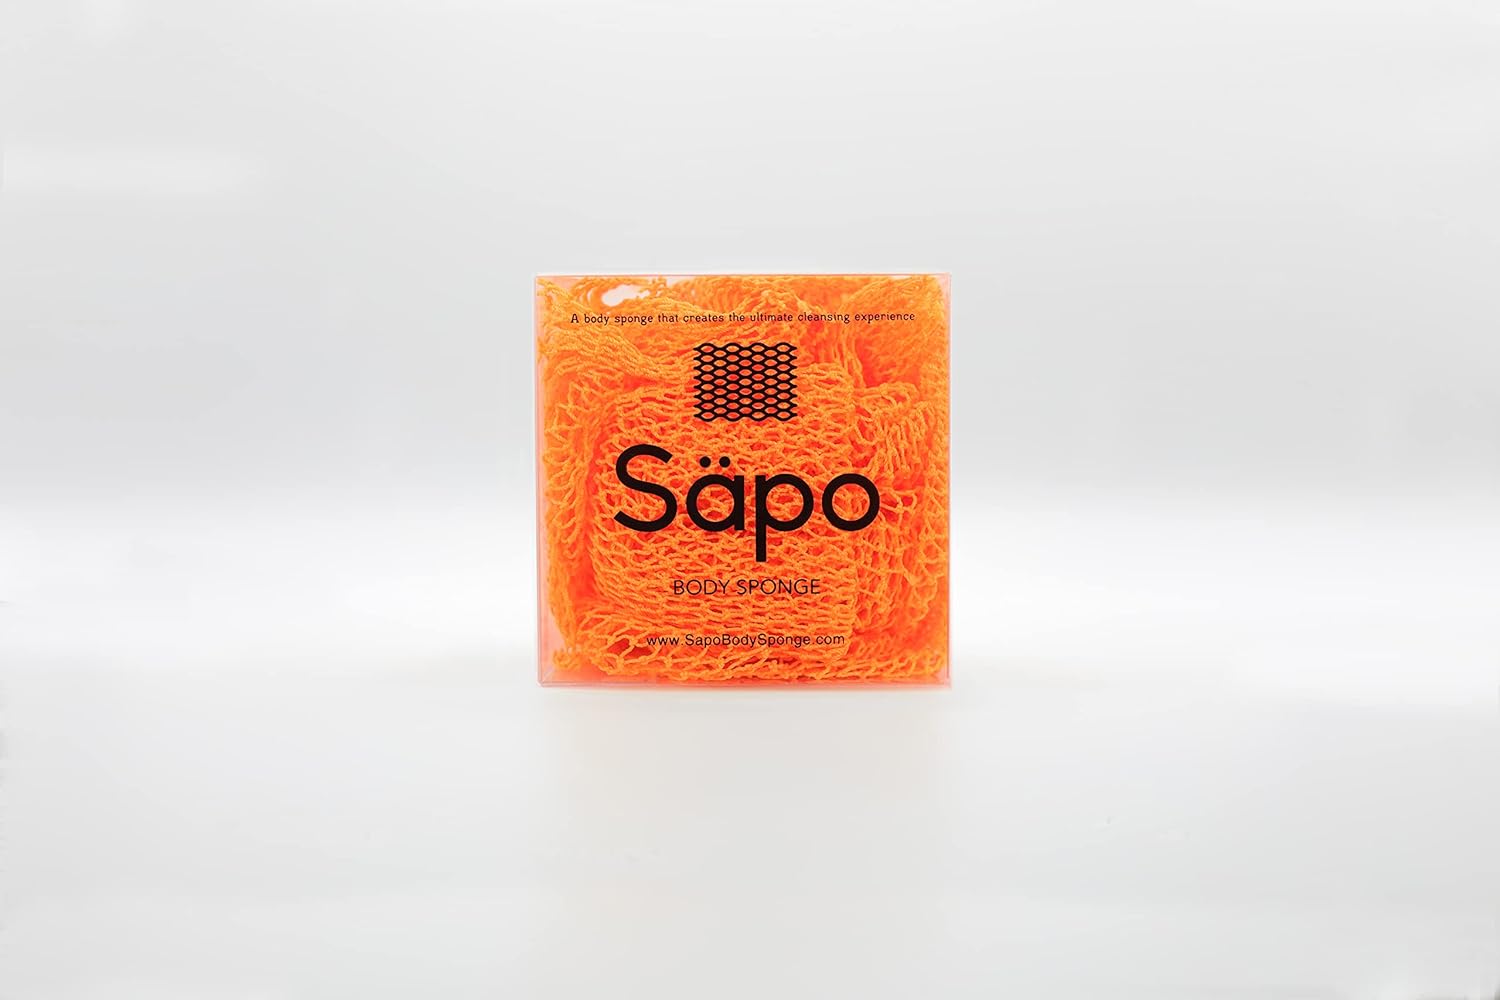 Sapo Body Sponge, Authentic African exfoliating Body net, Smooth and Alleviate Dry Skin, 5ft Long (Neon Peach)